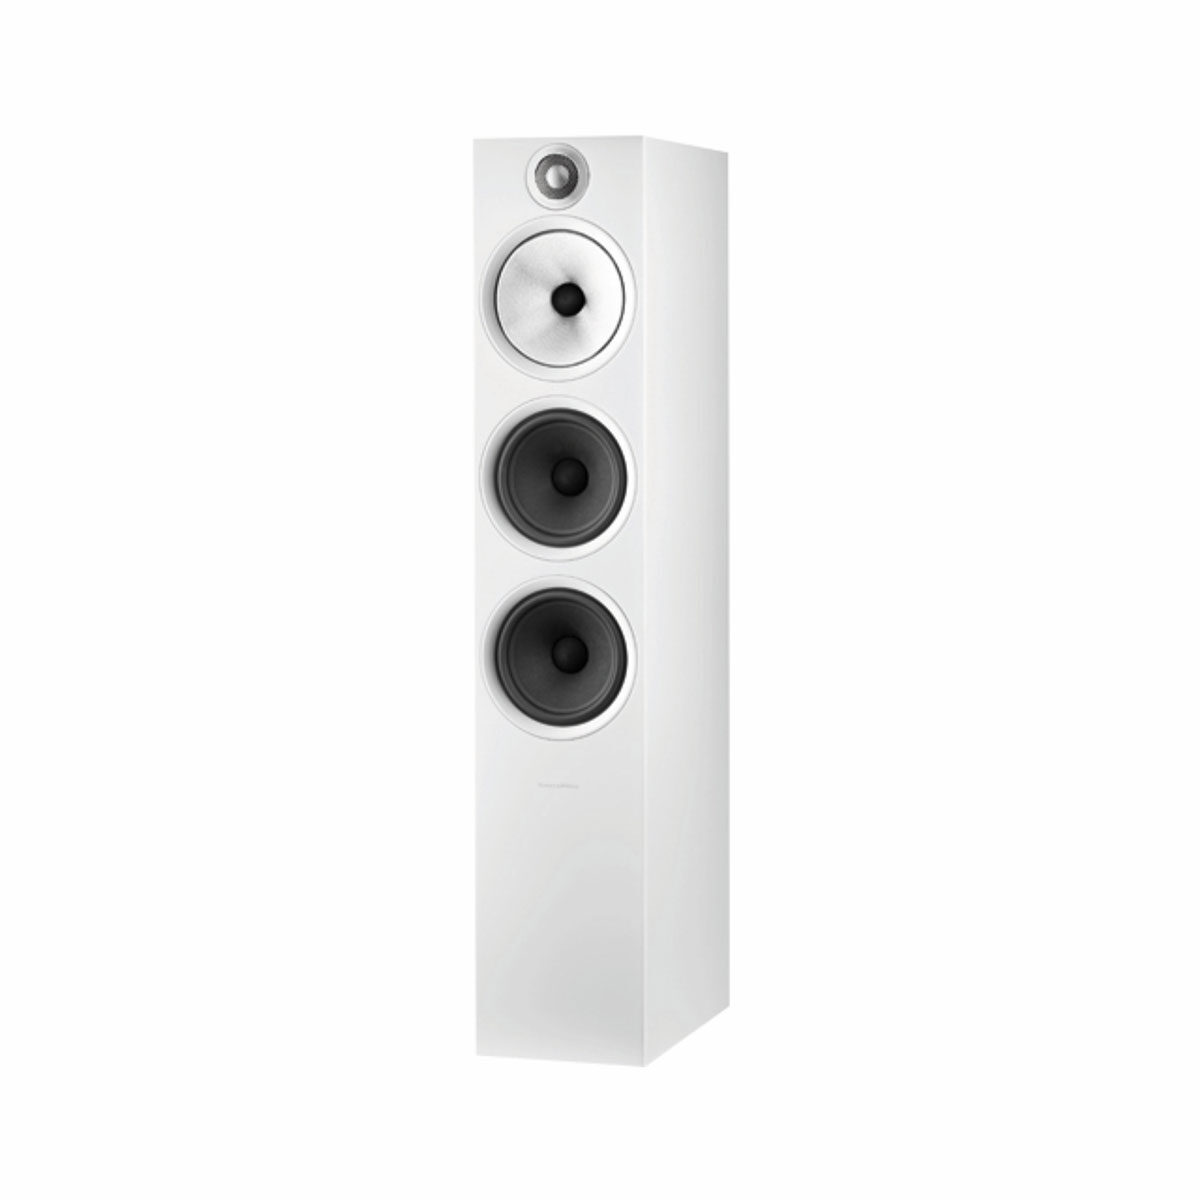 Bowers&Wilkins-603-AE-Weiss